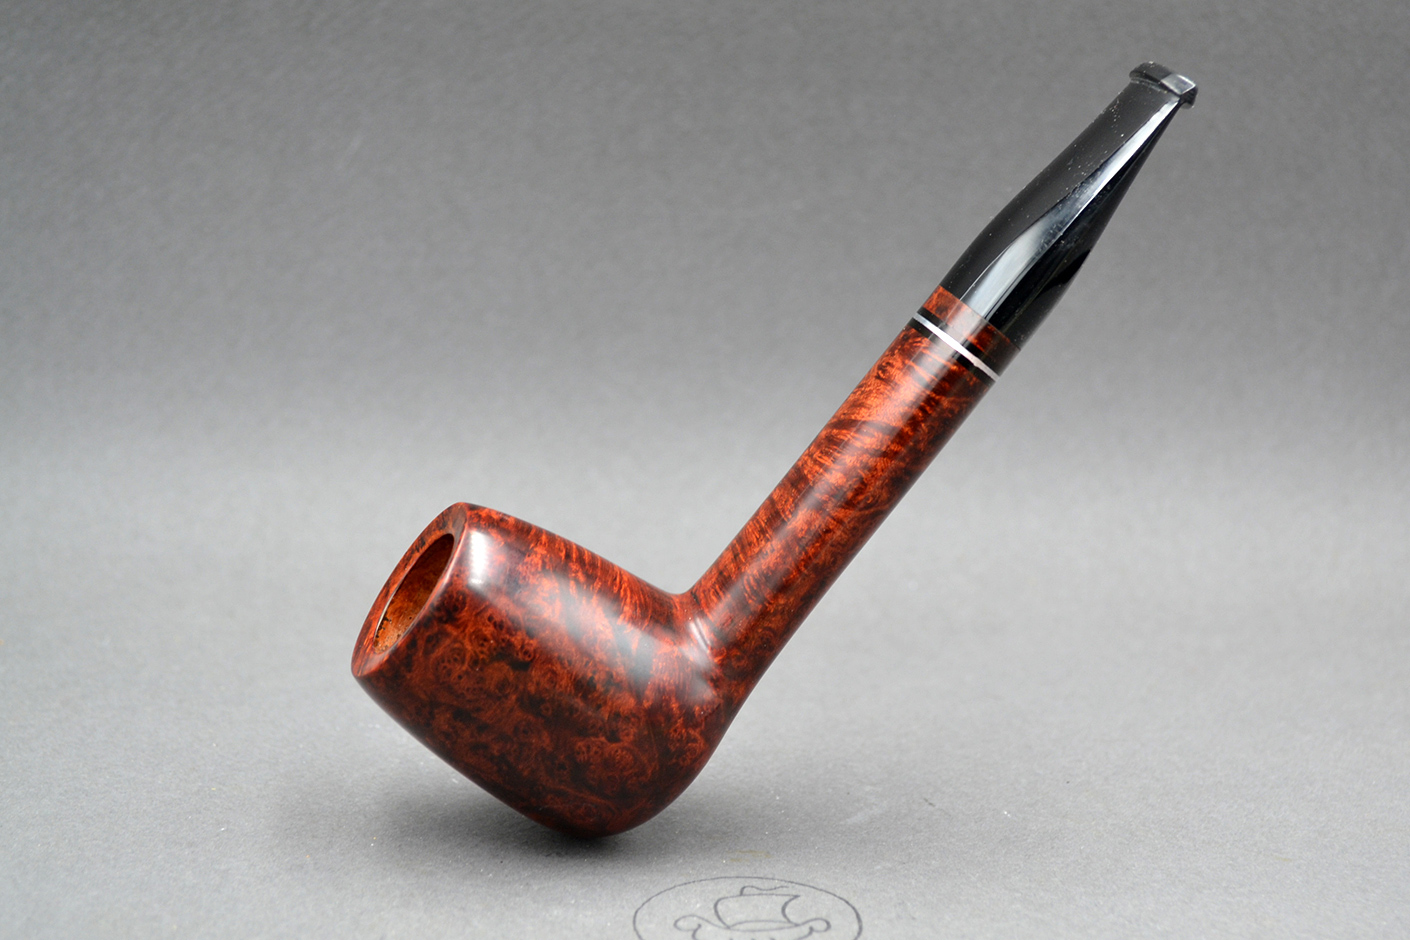 38mm 22256 handmade briar tobacco pipe constantinos zissis 0001